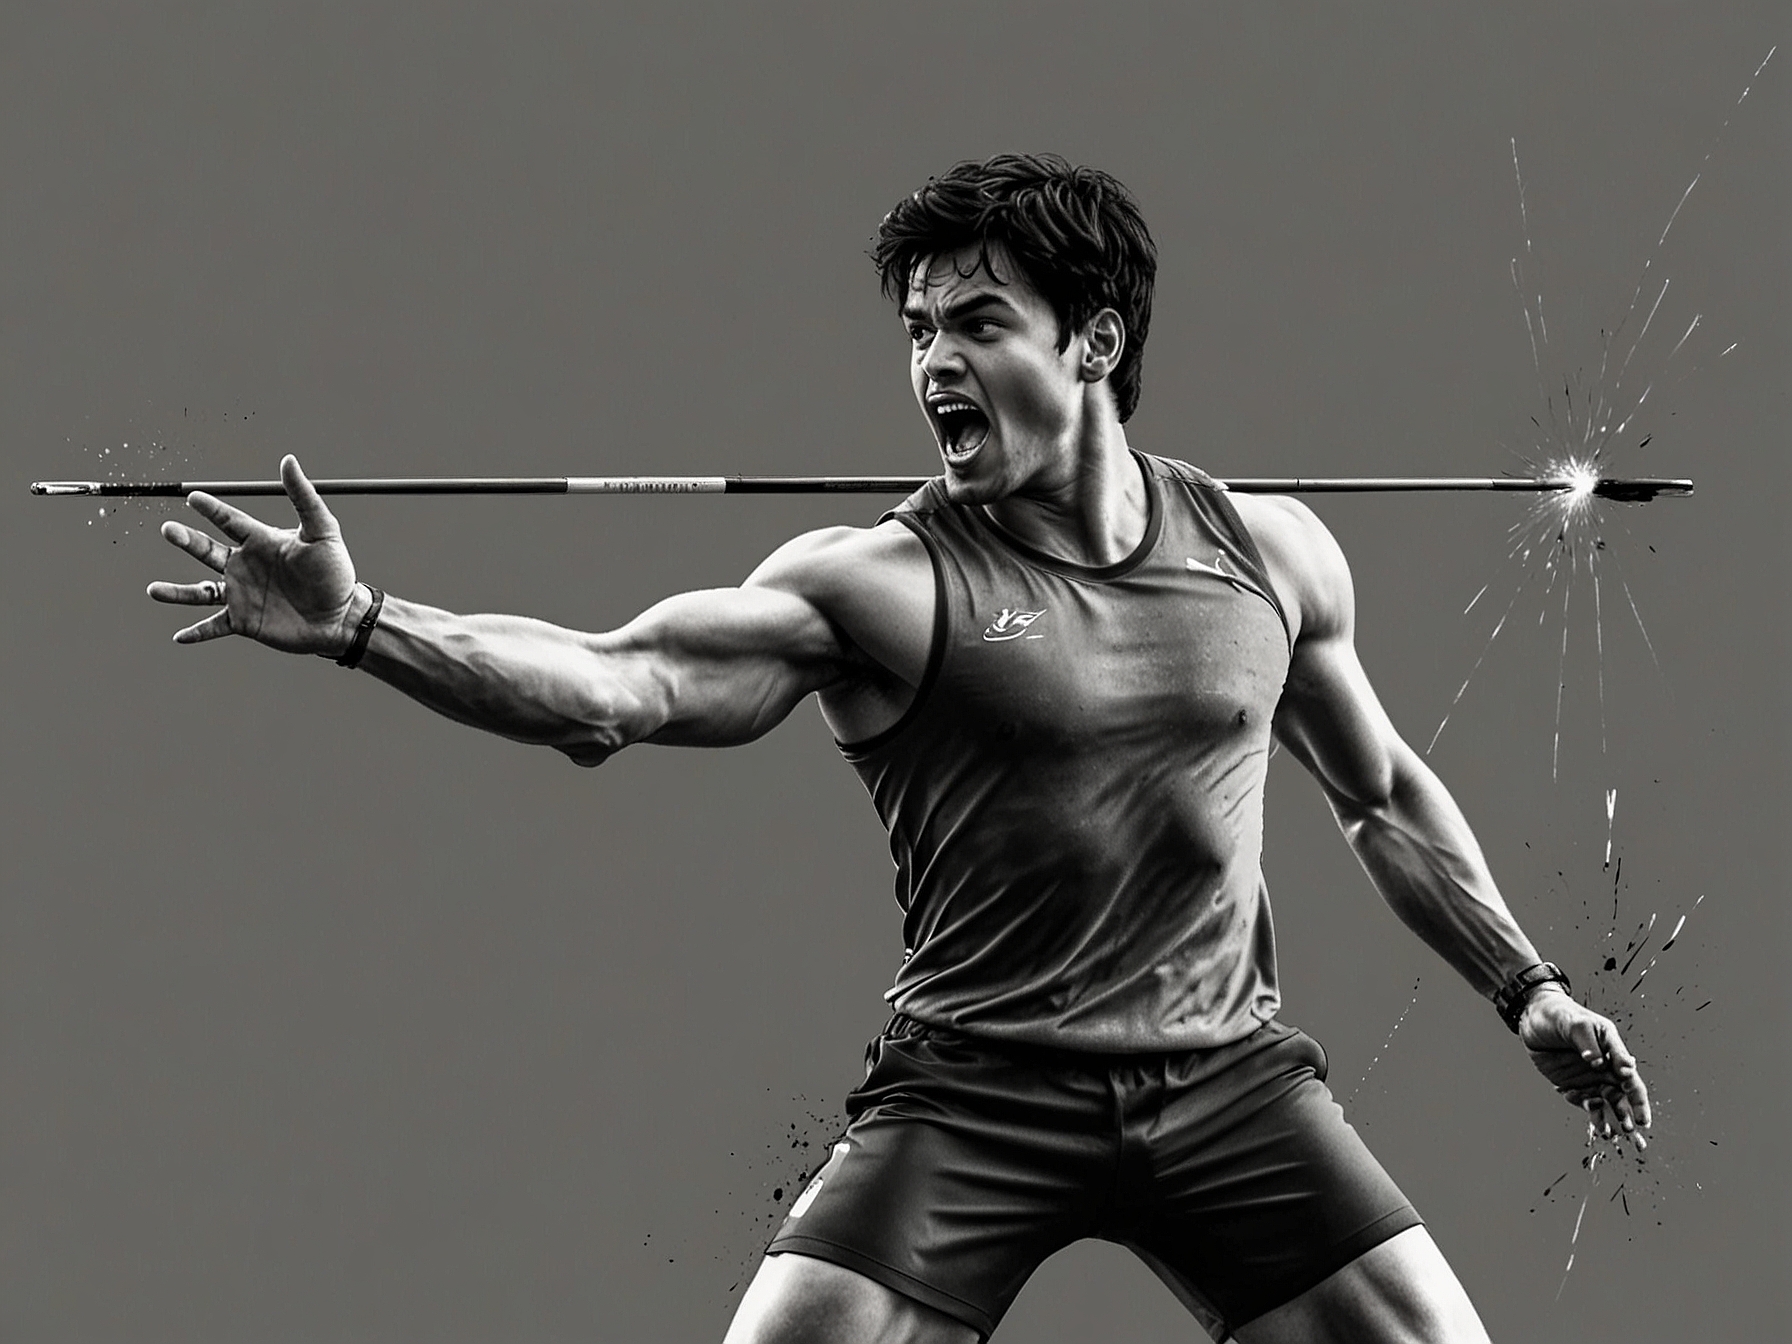 Neeraj Chopra throwing a javelin during a competitive event, showcasing his powerful technique.